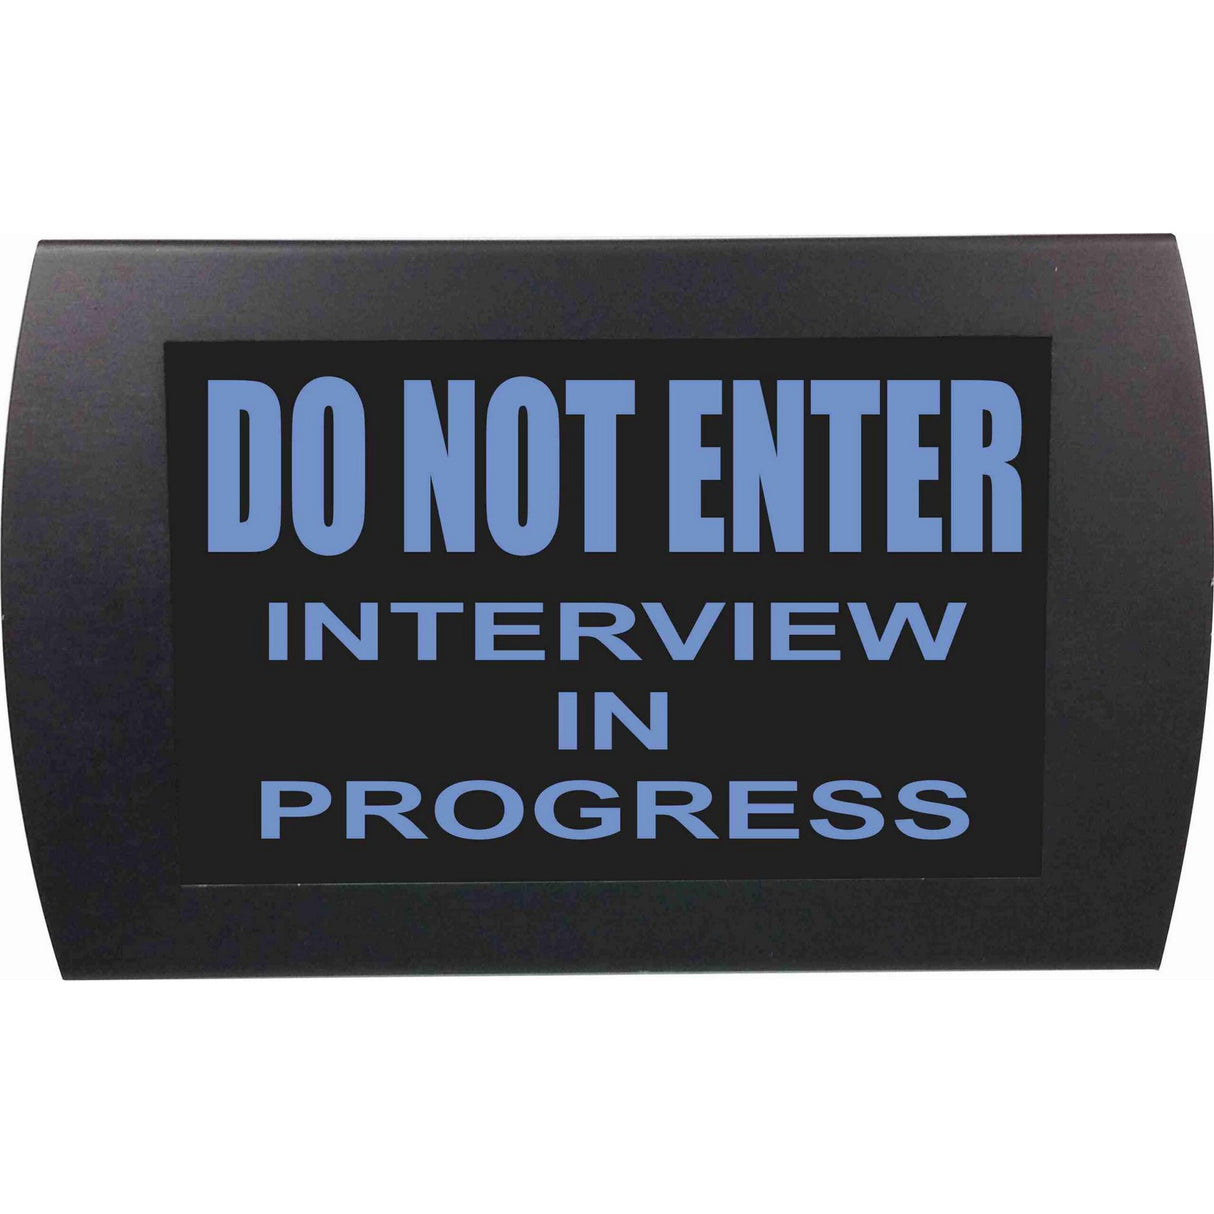 American Recorder OAS-2056M-BL "DO NOT ENTER - INTERVIEW" LED Lighted Sign, Blue